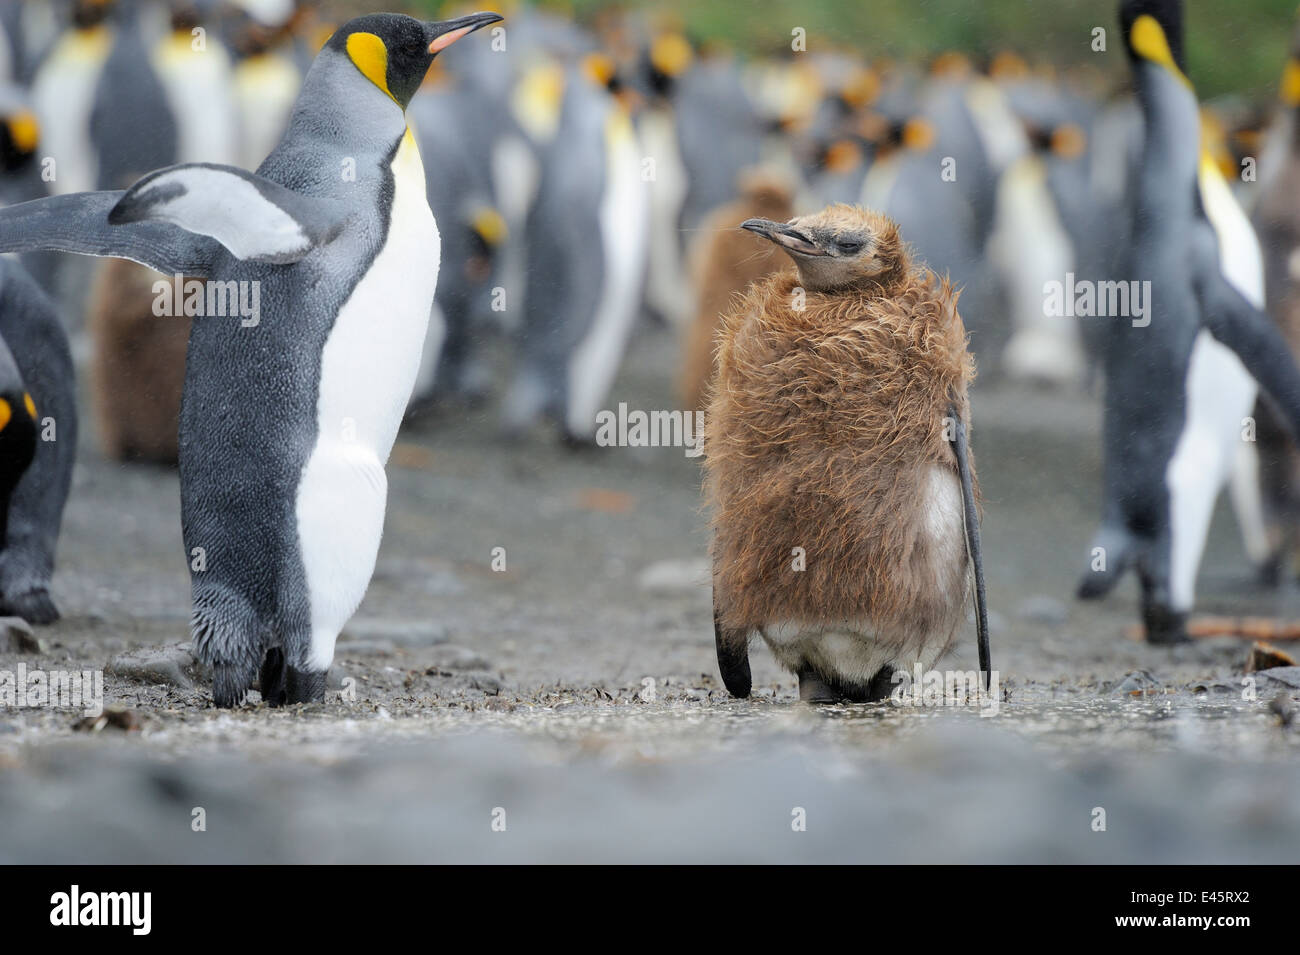 Juvenile King Penguin (Aptenodytes patagonicus) standing in the colony on the beach of Macquarie Island, sub Antarctic waters. Stock Photo